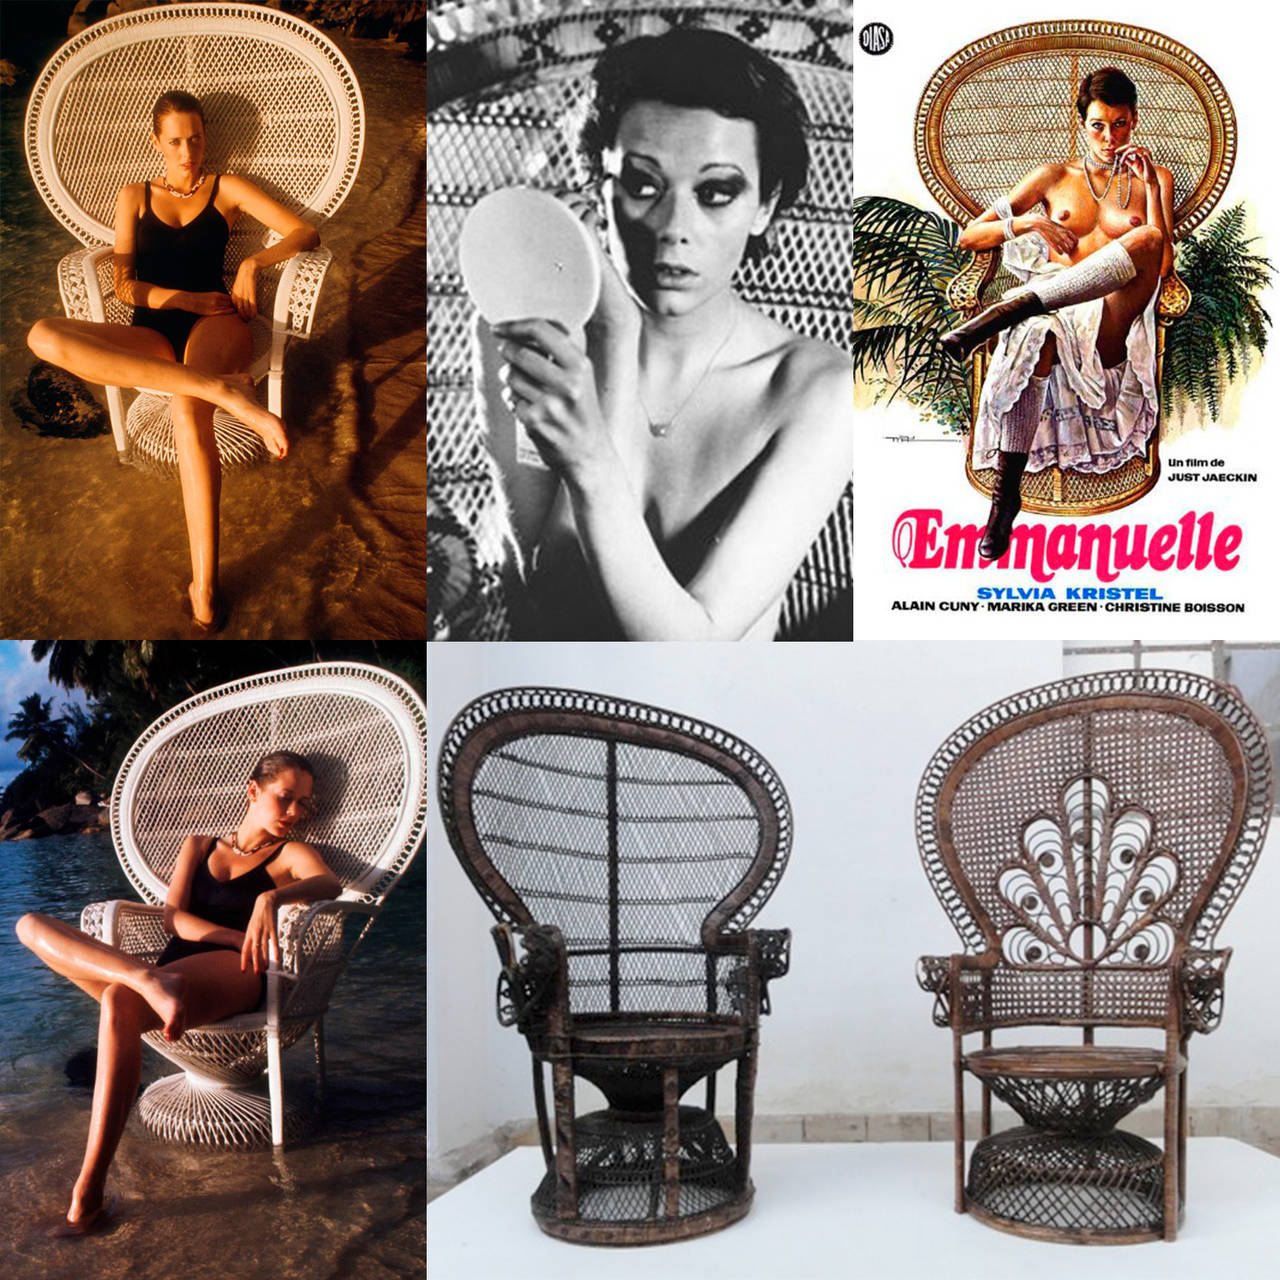 A story on the ''erotic'' history of a peacock chair:

This model wicker peacock chair comes in many varieties dating back to the 1950s when famous Italian designer Carlo Mollino used a similar model in rattan or wicker to make nude polaroids of